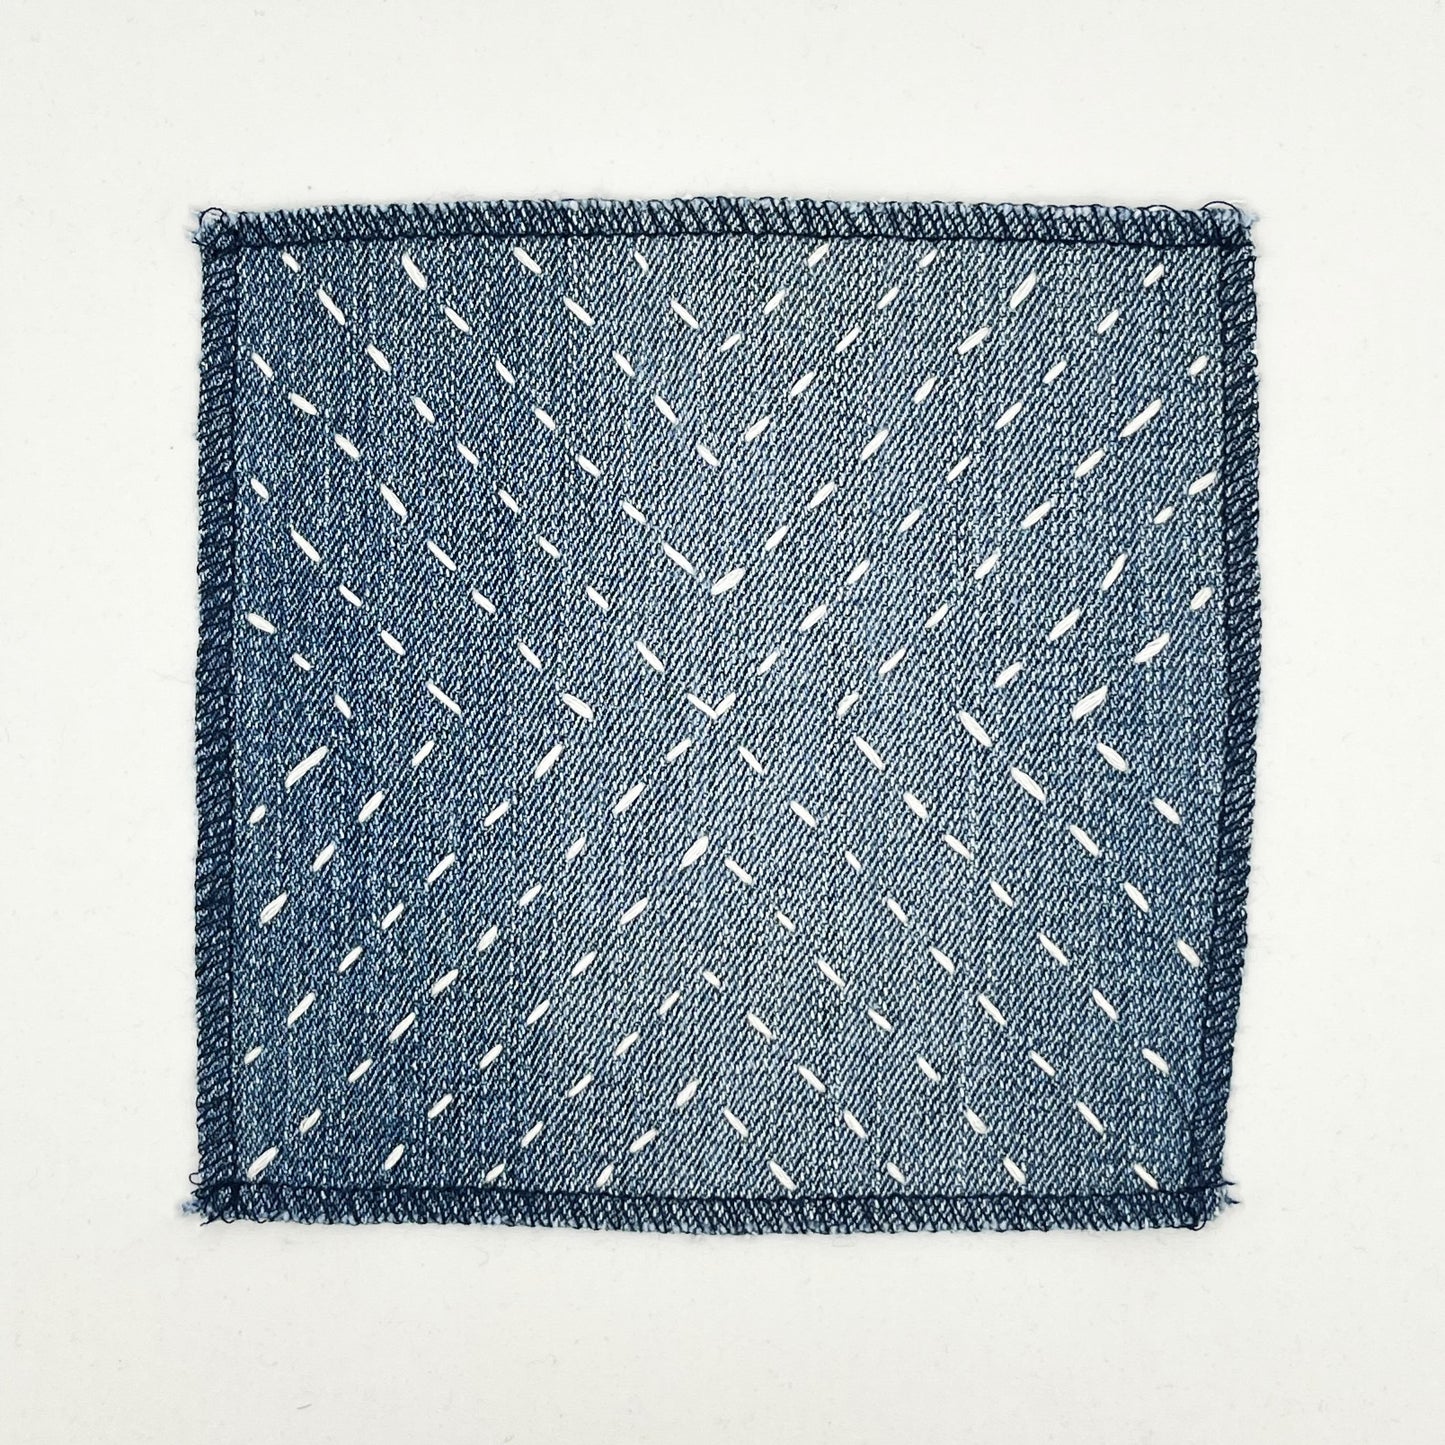 a square patch made out of denim, handstitched with ivory running stitches in a radiating X pattern, with overlocked edges, on a white background